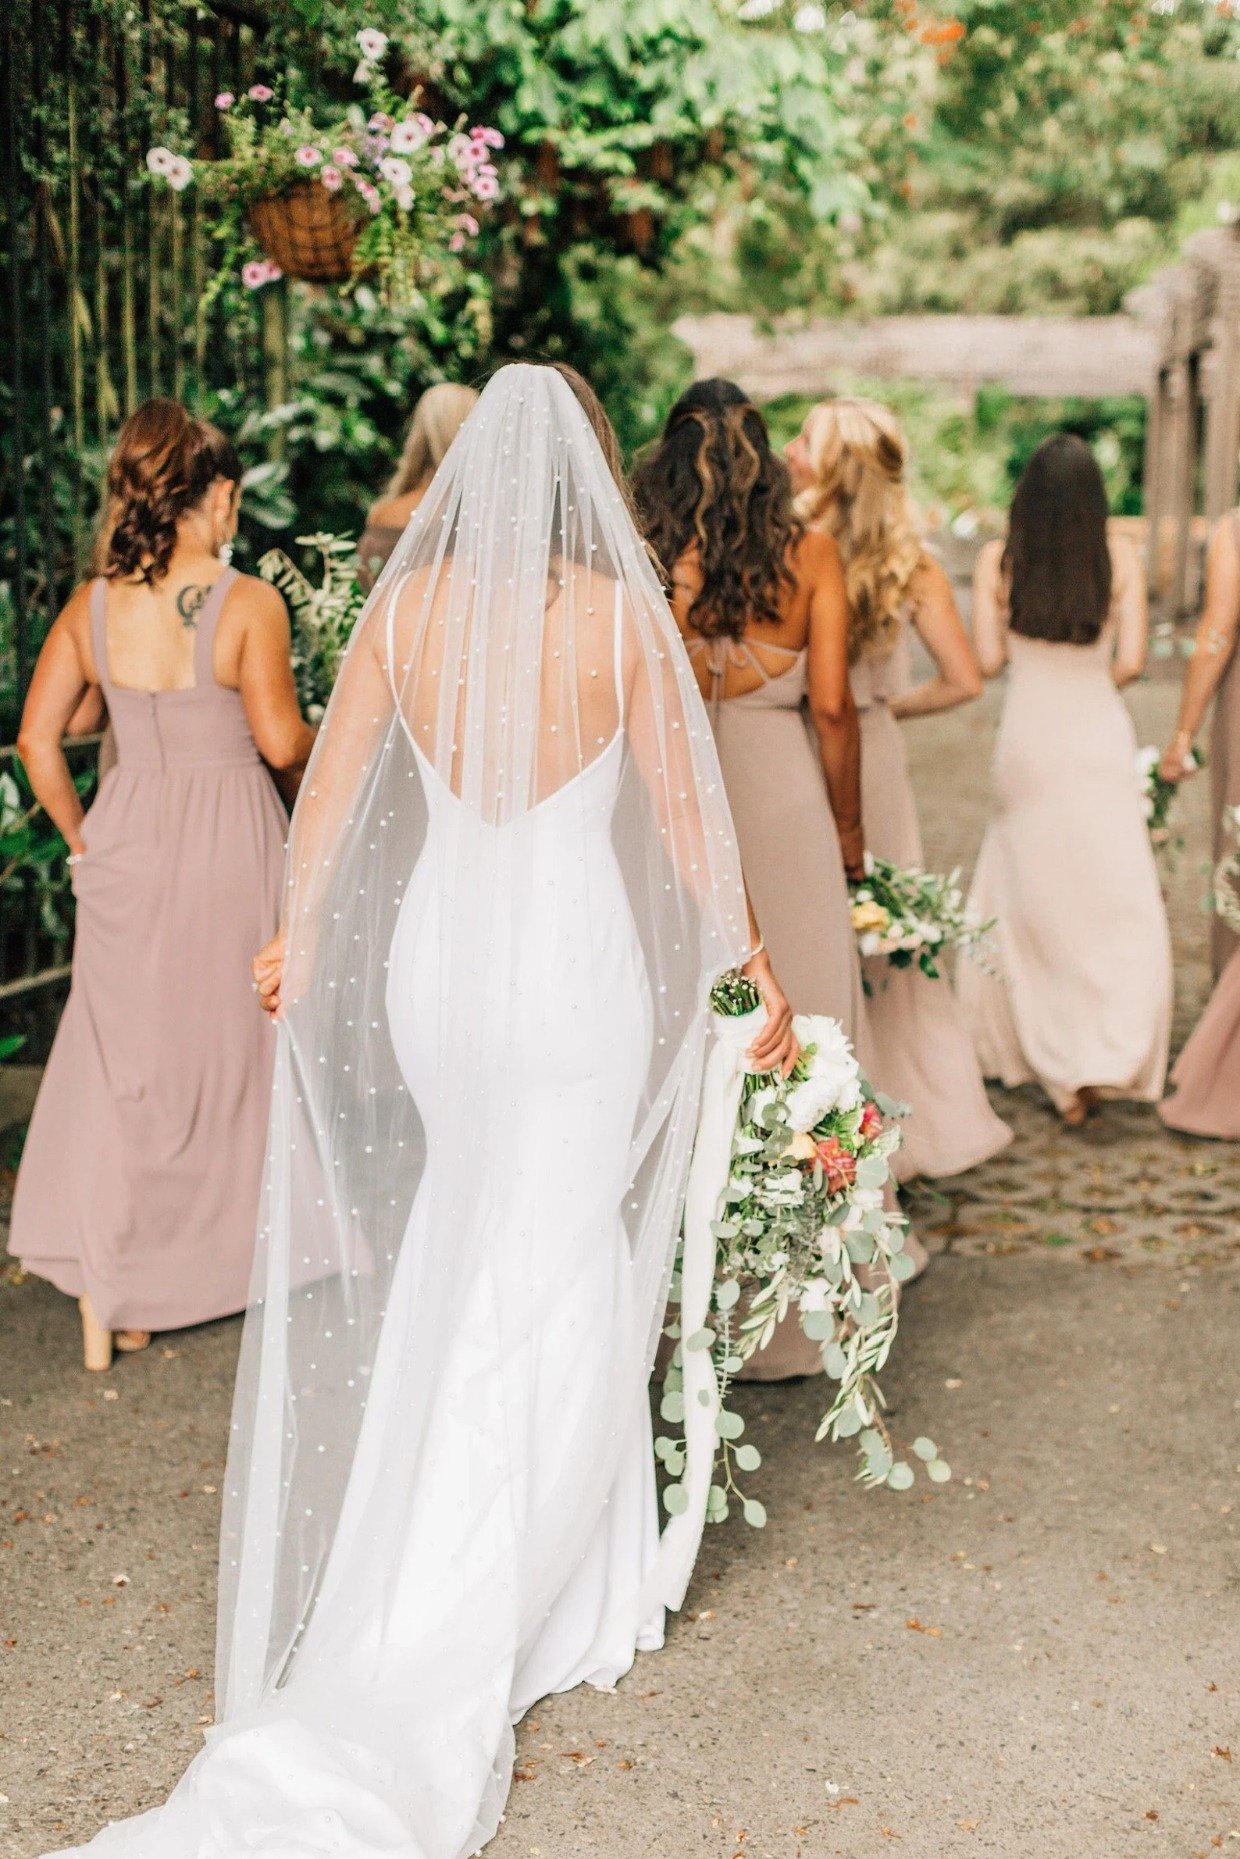 Beautiful Bridal Veils and Where To Shop For Veils Online